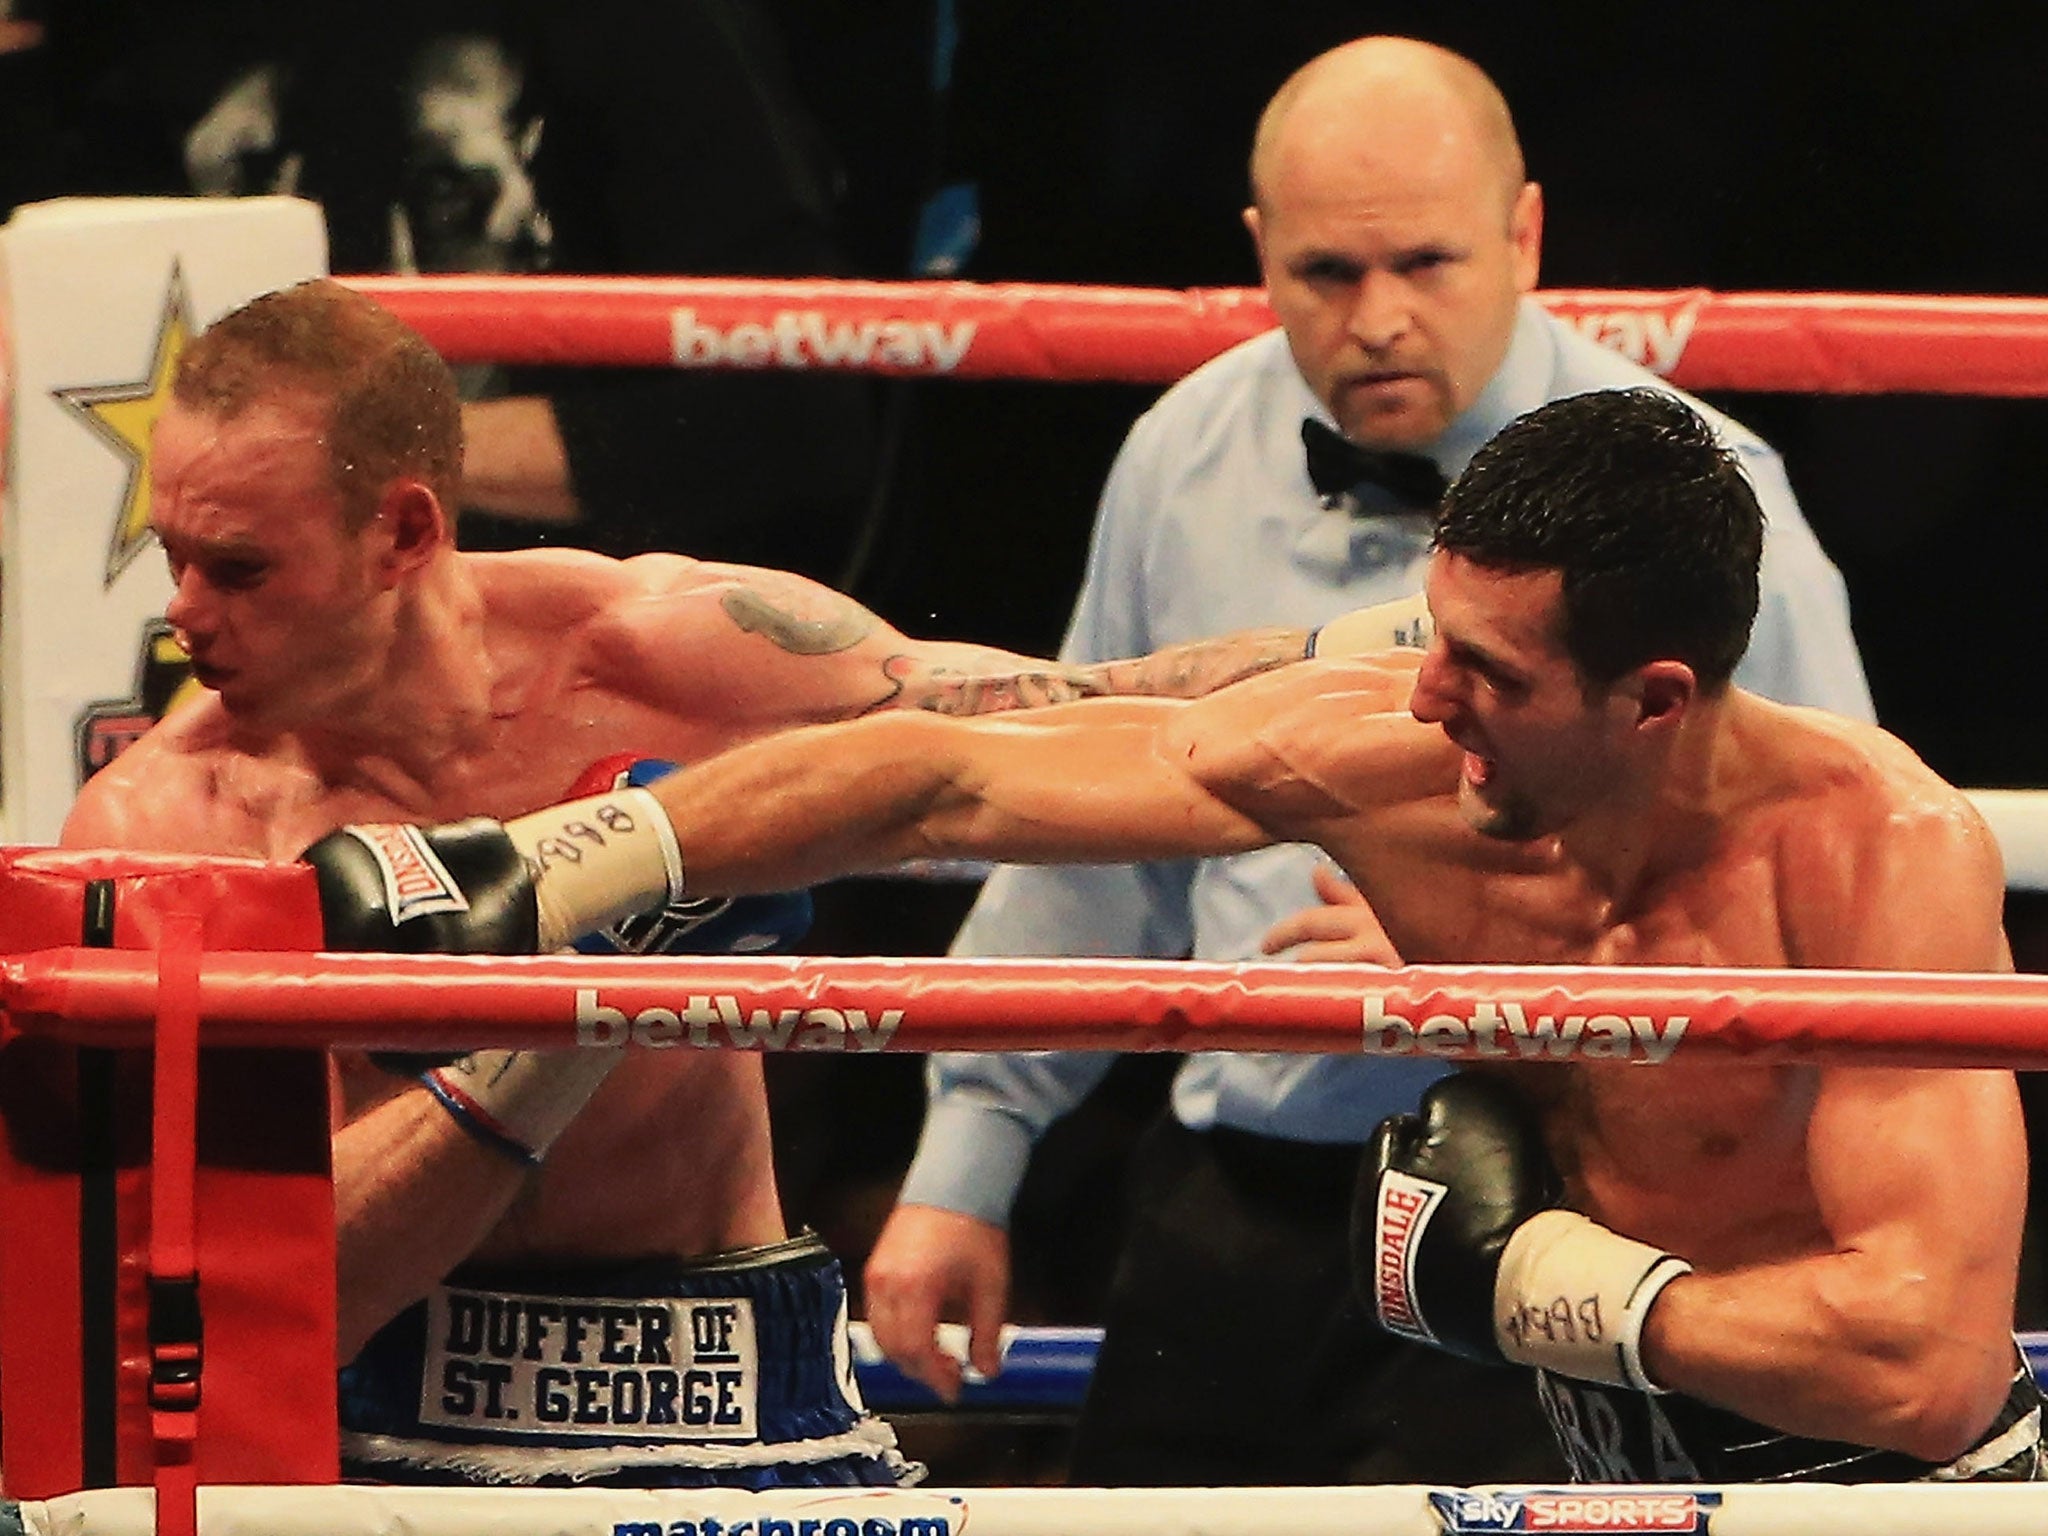 Froch knocks out George Groves in the rematch at Wembley